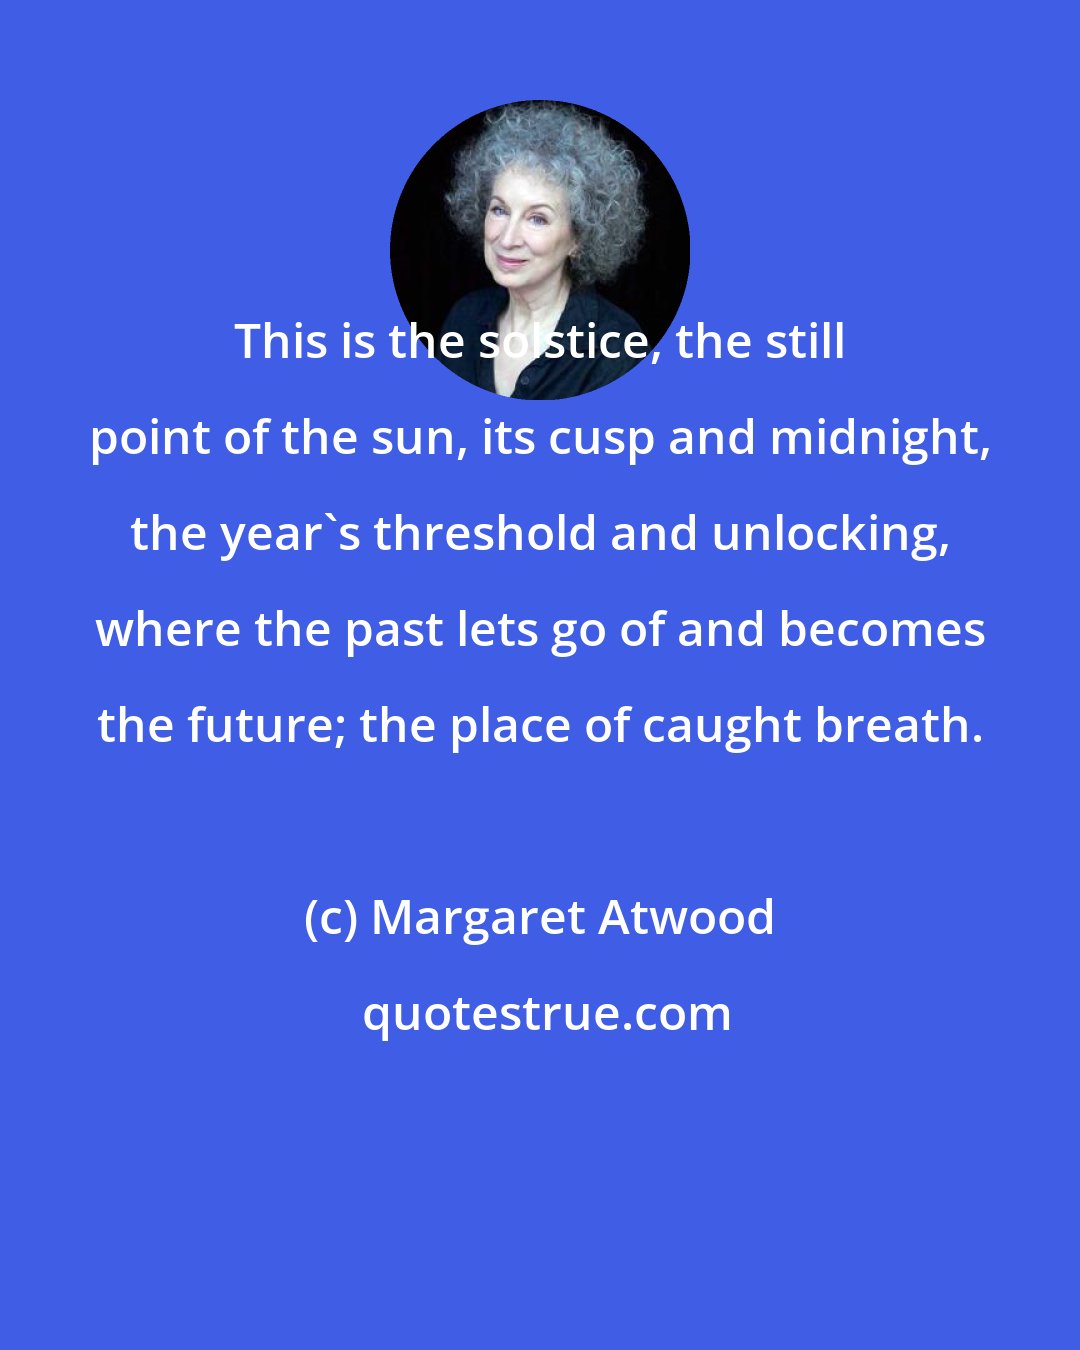 Margaret Atwood: This is the solstice, the still point of the sun, its cusp and midnight, the year's threshold and unlocking, where the past lets go of and becomes the future; the place of caught breath.